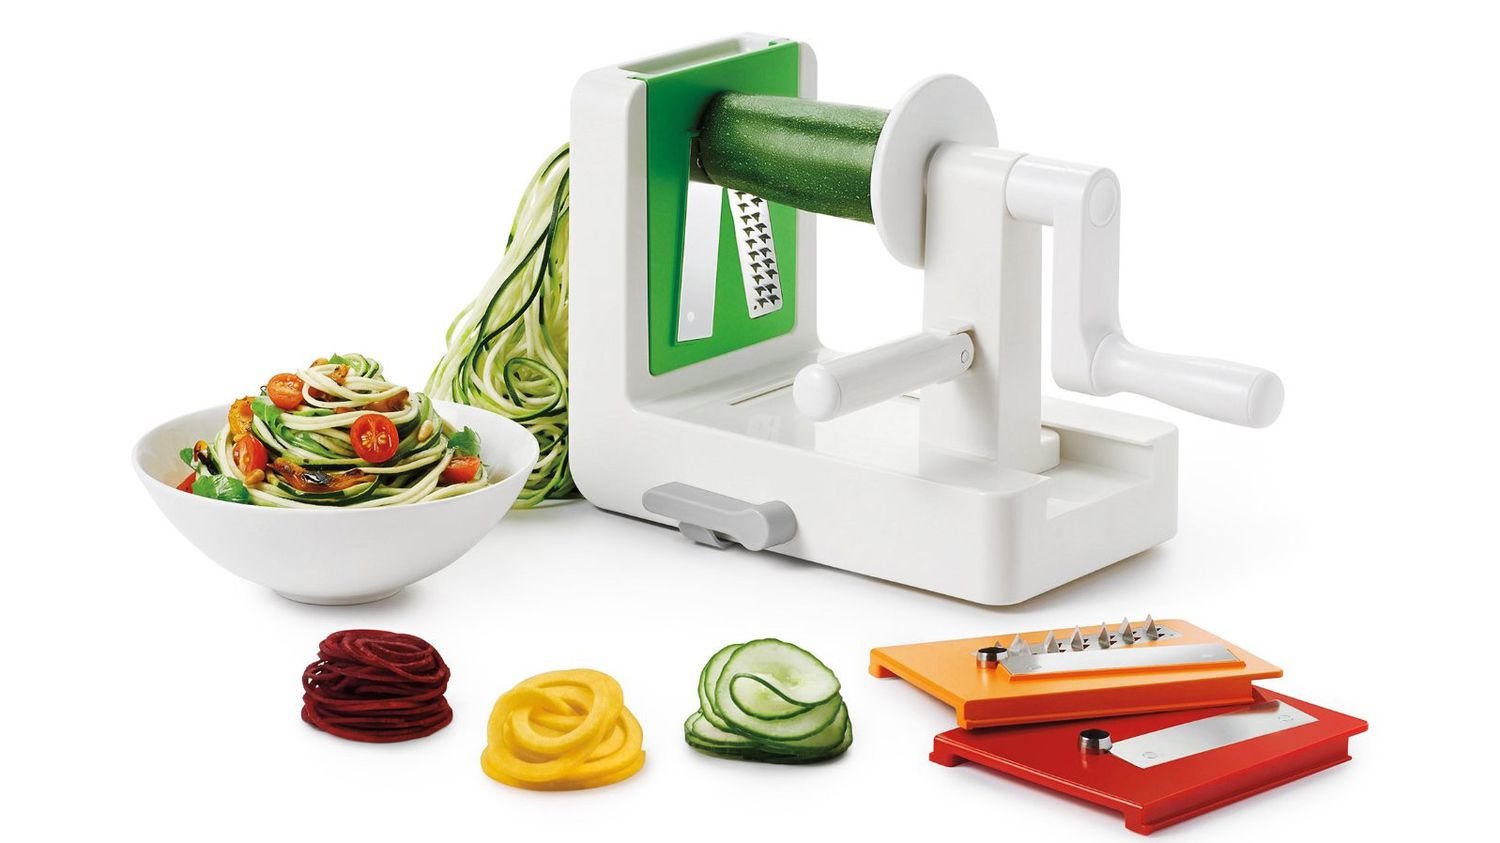 Vegetable Spiralizer Review: Unbiased Analysis and Recommendations